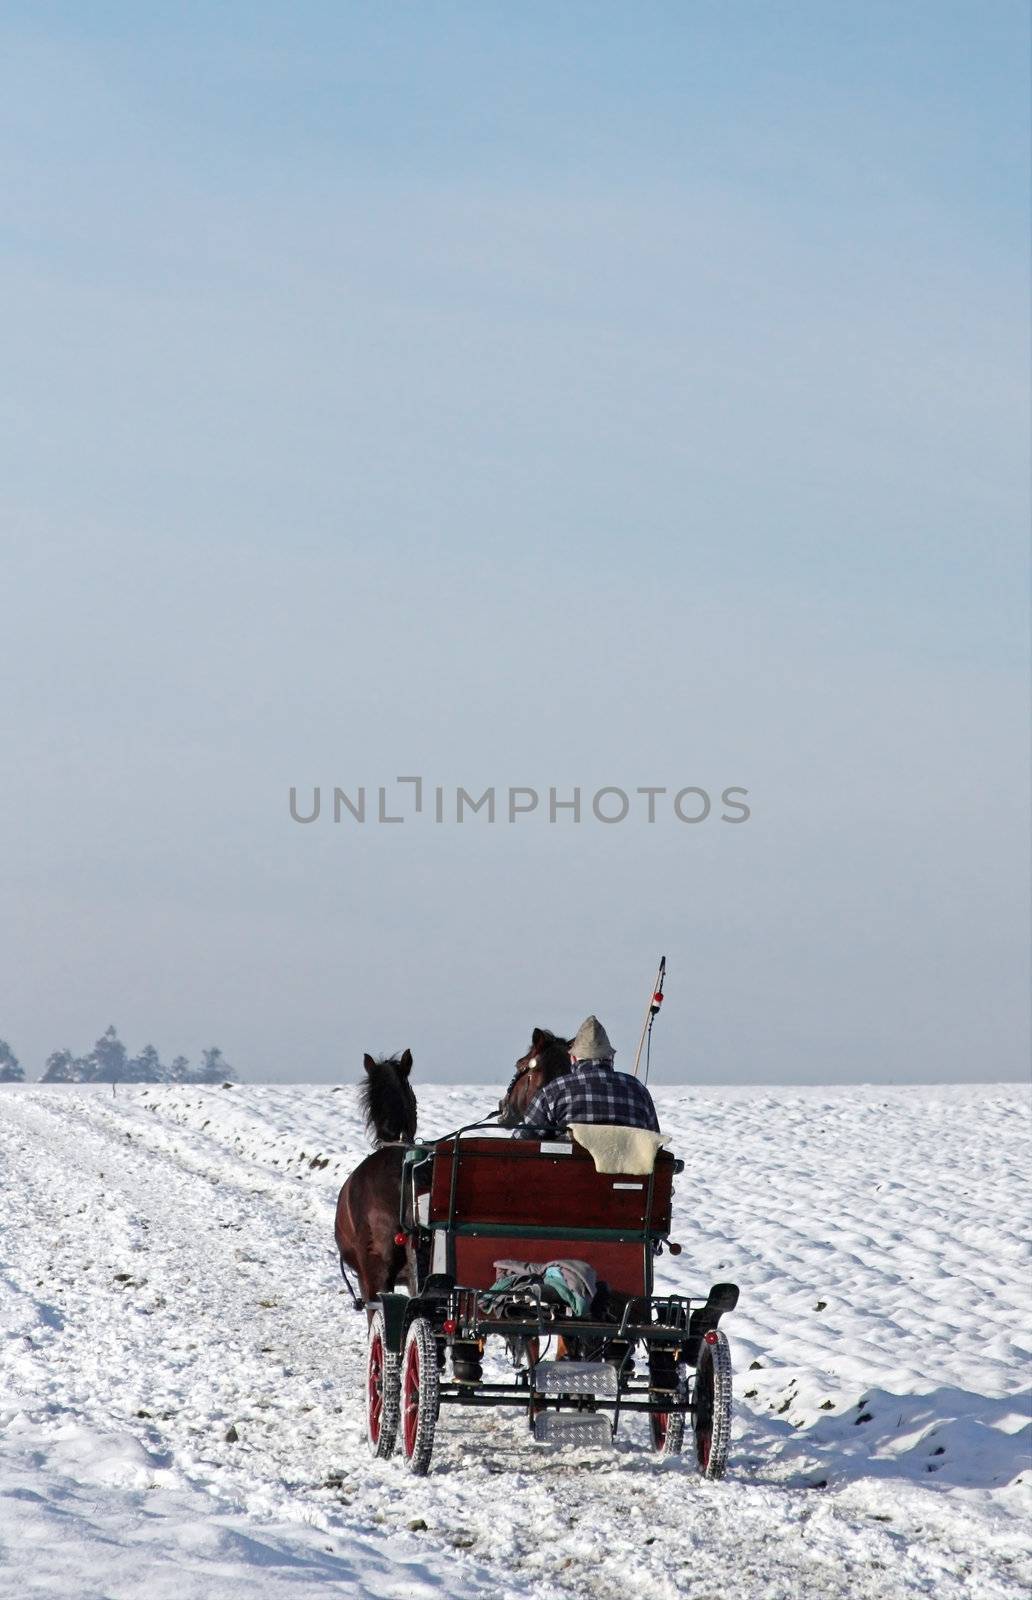 This image shows a driving horse-drawn carriage in winter